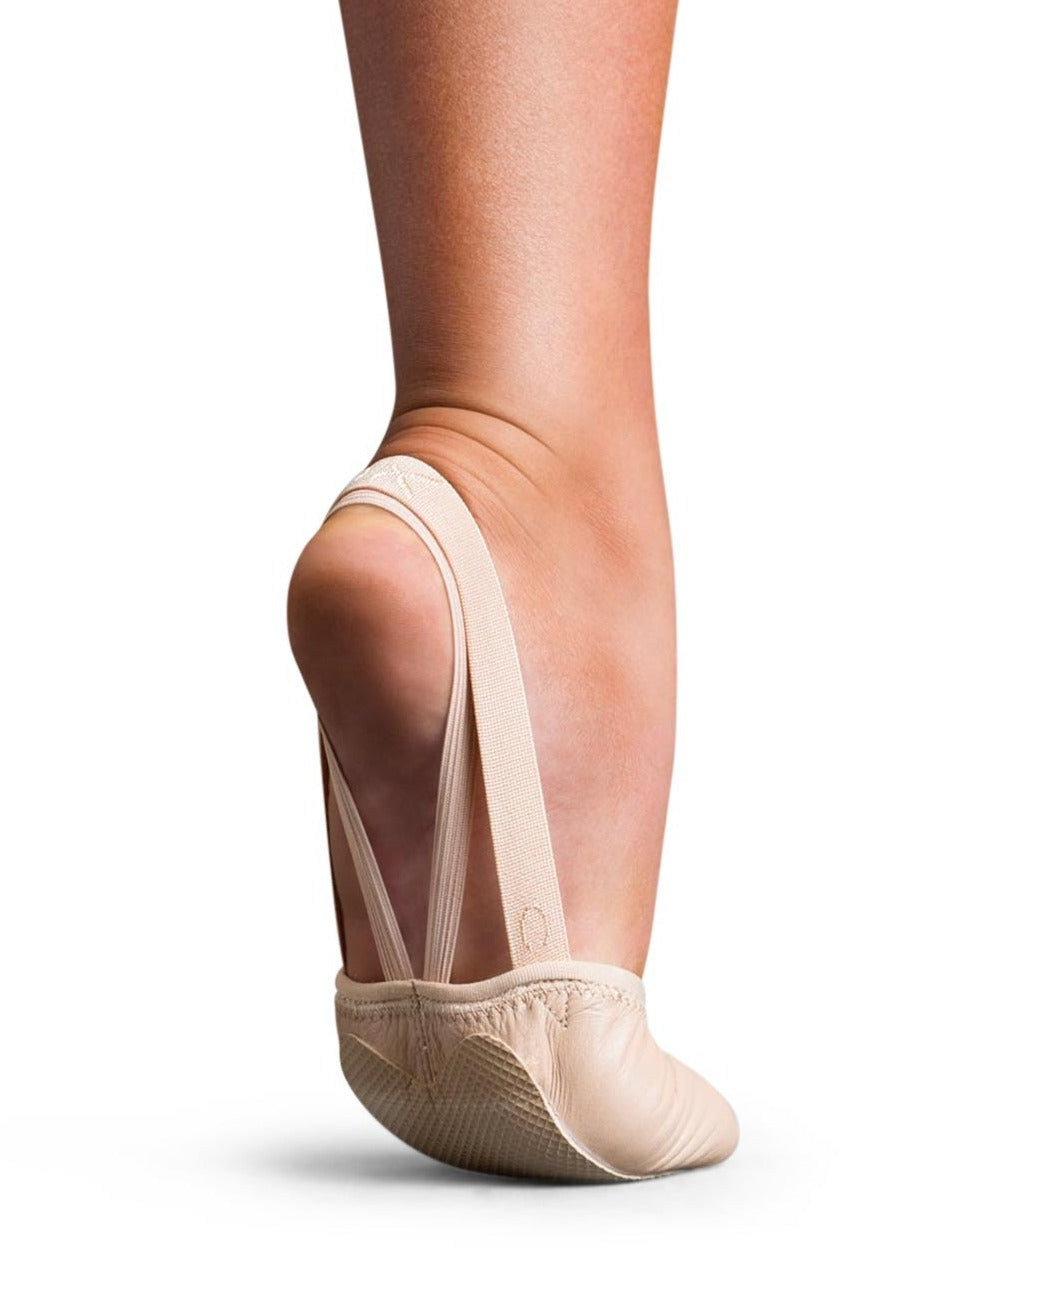 Turning Pointe 55 Half Sole Shoes